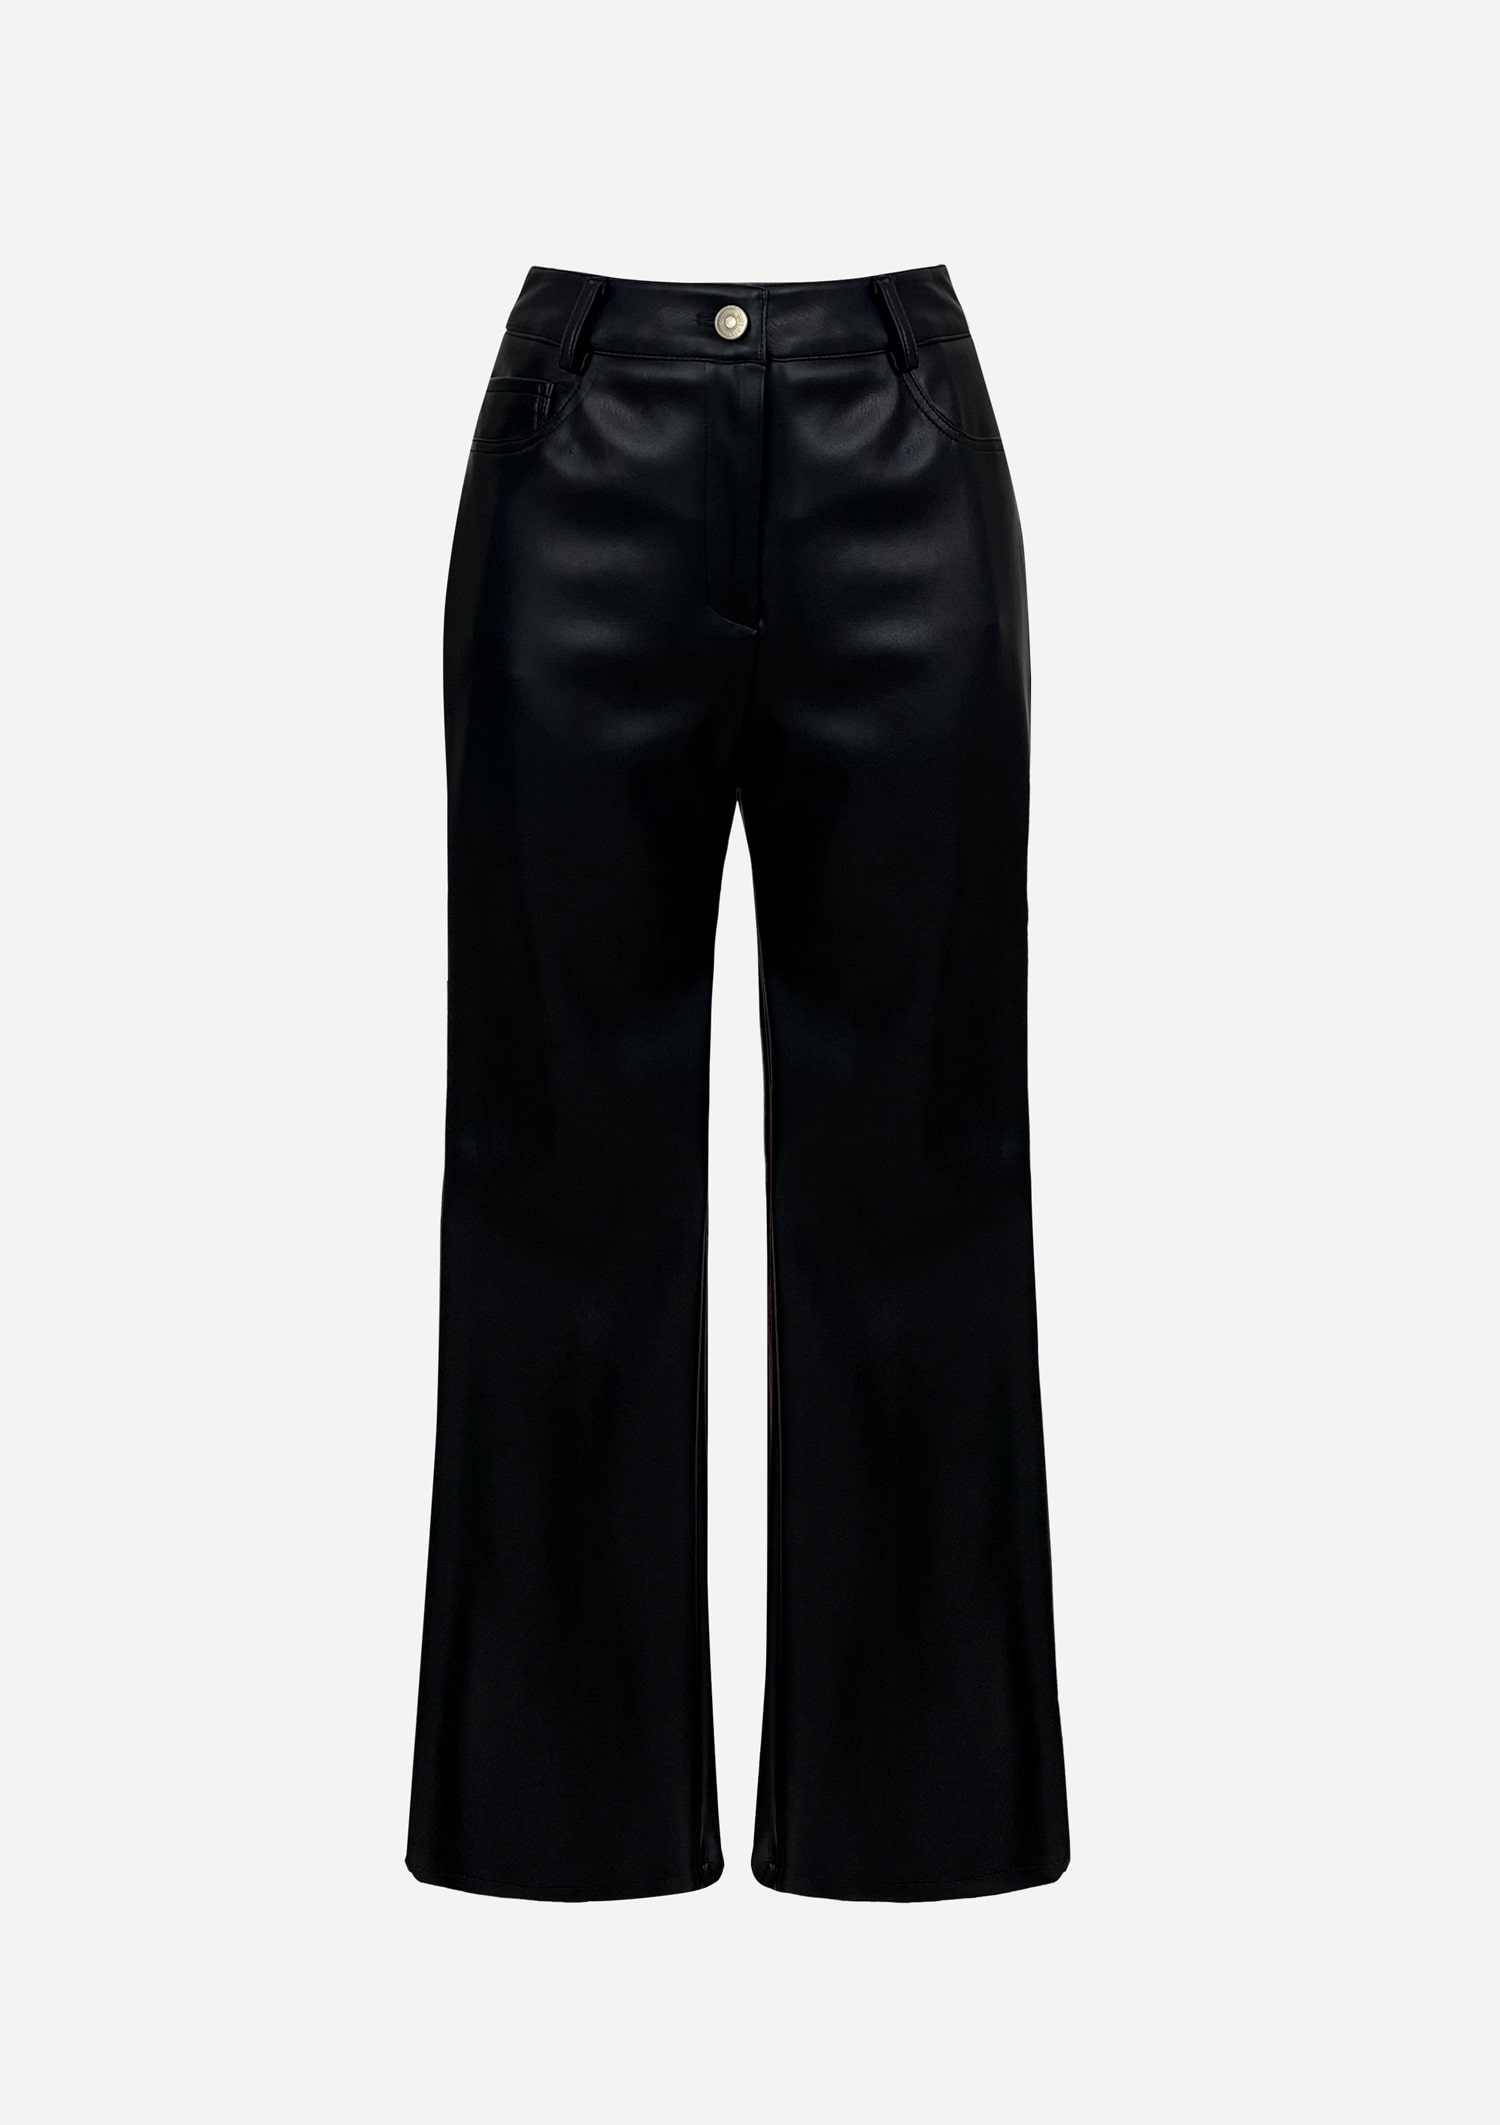 Black Cropped leather pants